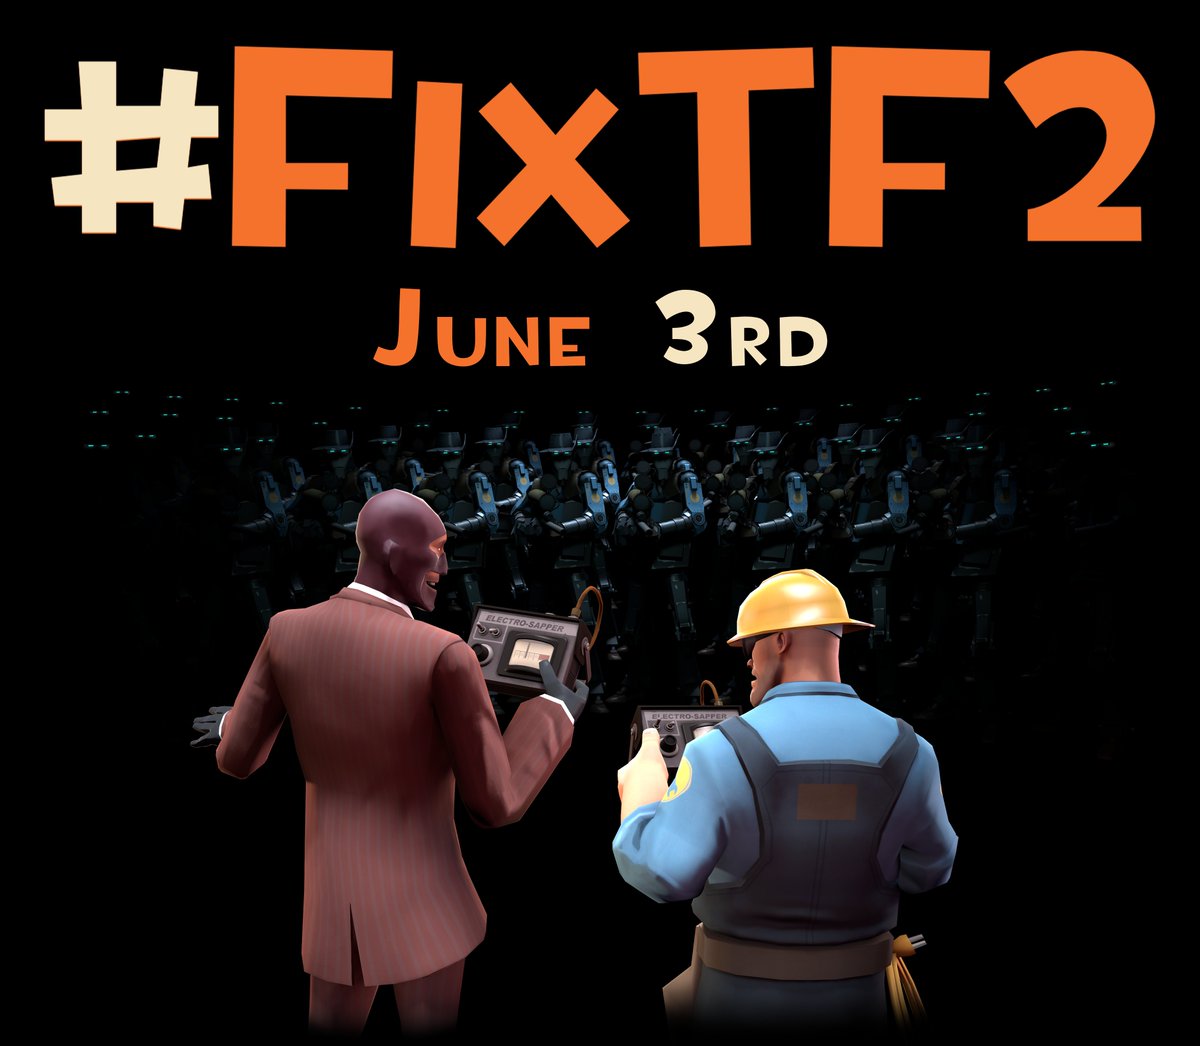 The Negligence TF2 has faced from Valve as well as the problems it has caused are absolutely Horrendous. It's been 2 years. nothing changed. JUNE 3RD! Posts, Artworks, Videos, Documentation Let's show them how bad it REALLY is! #FixTF2 #SaveTF2 save.tf